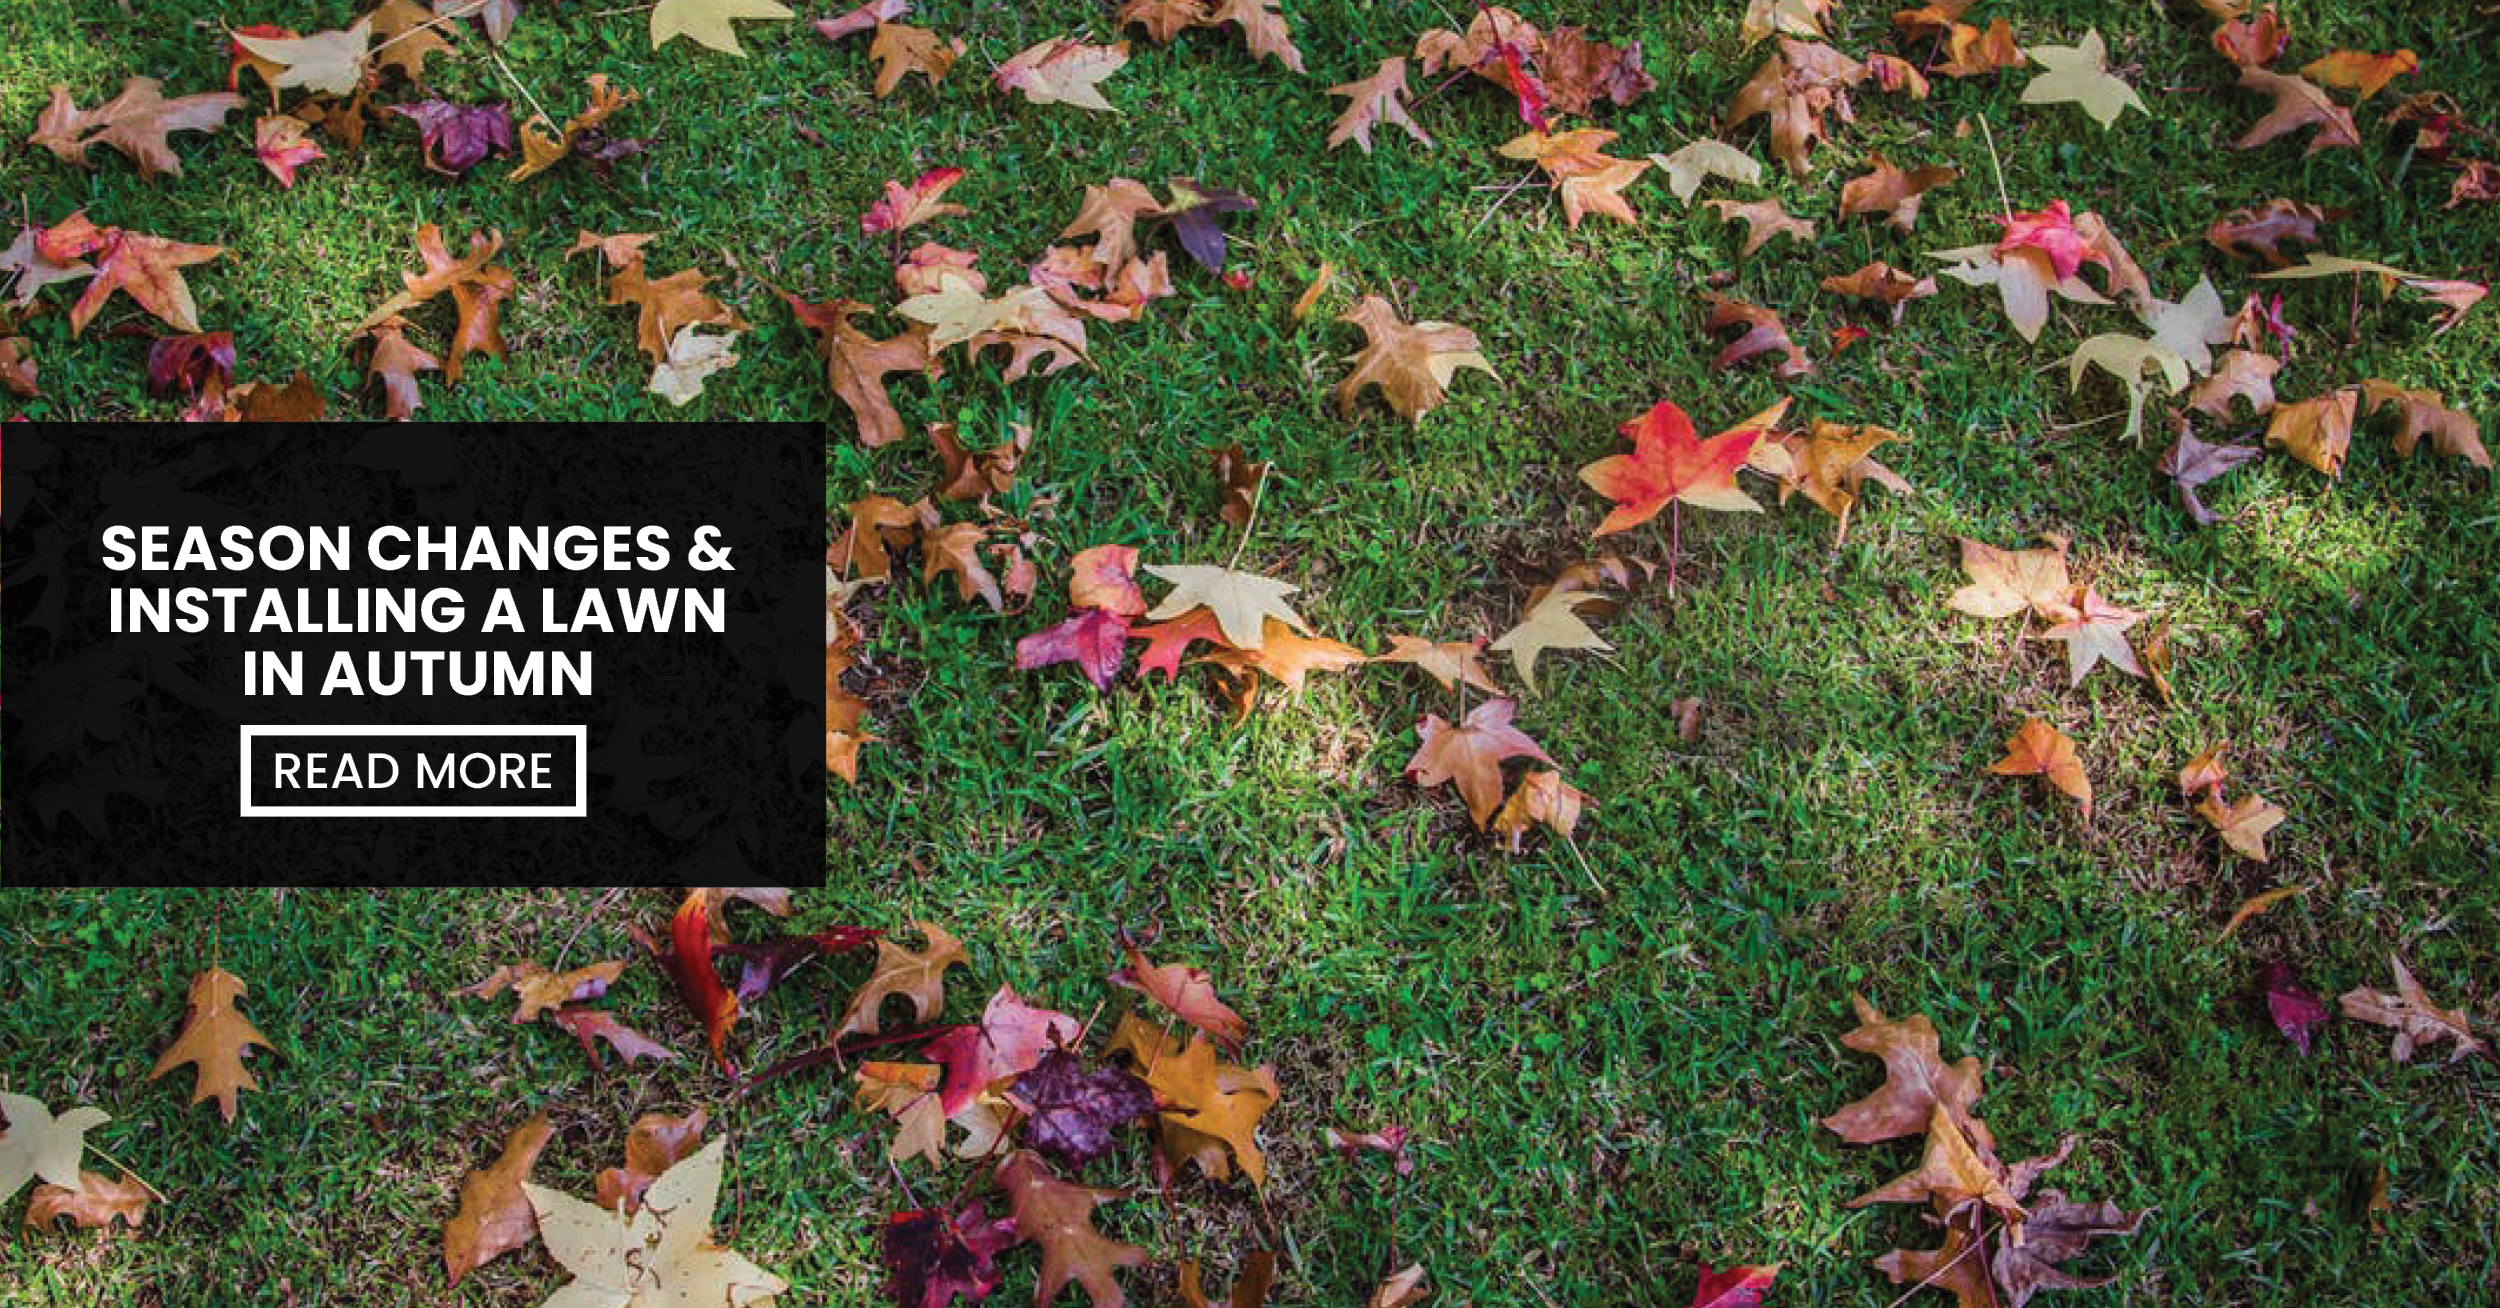 Blog - Lead Image (Season Changes & Installing A Lawn In Autumn - Jimboomba Turf Group)